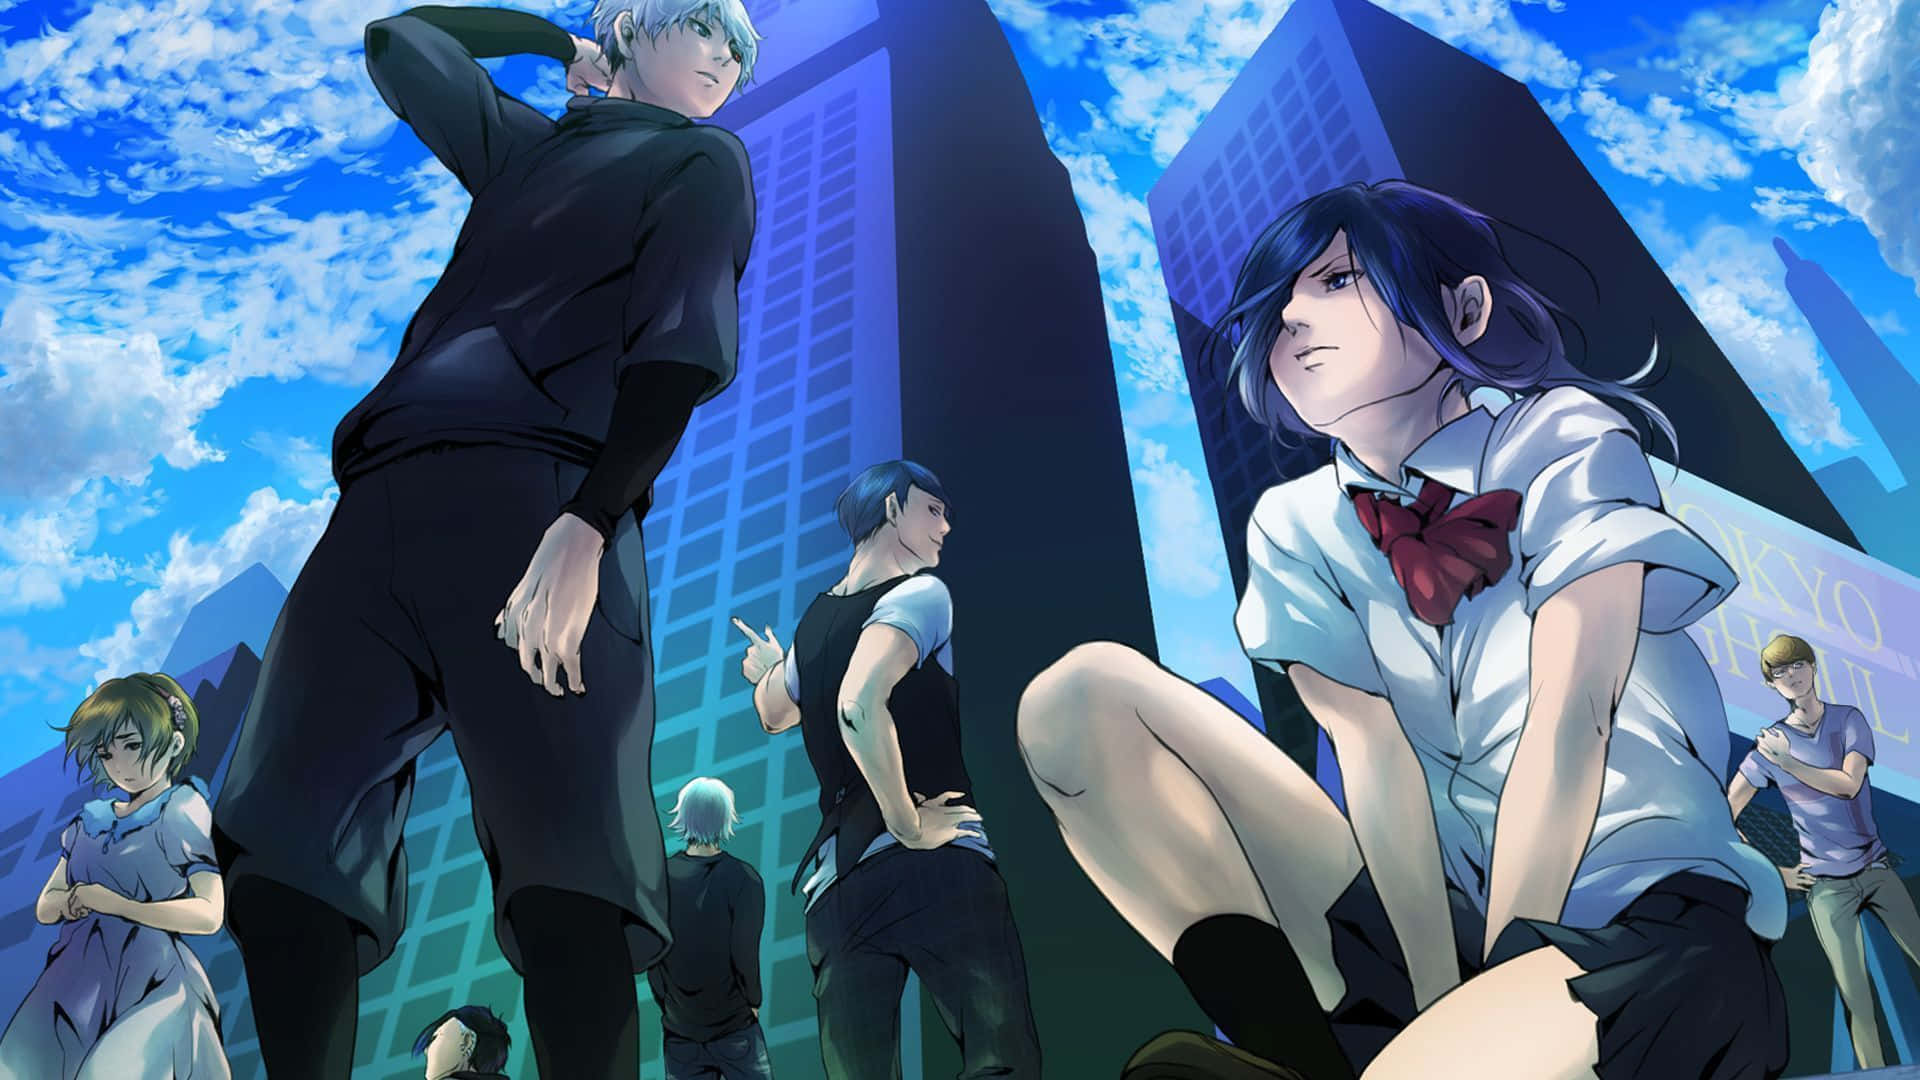 A Glimpse of the Paranormal Chaos in Tokyo Ghoul